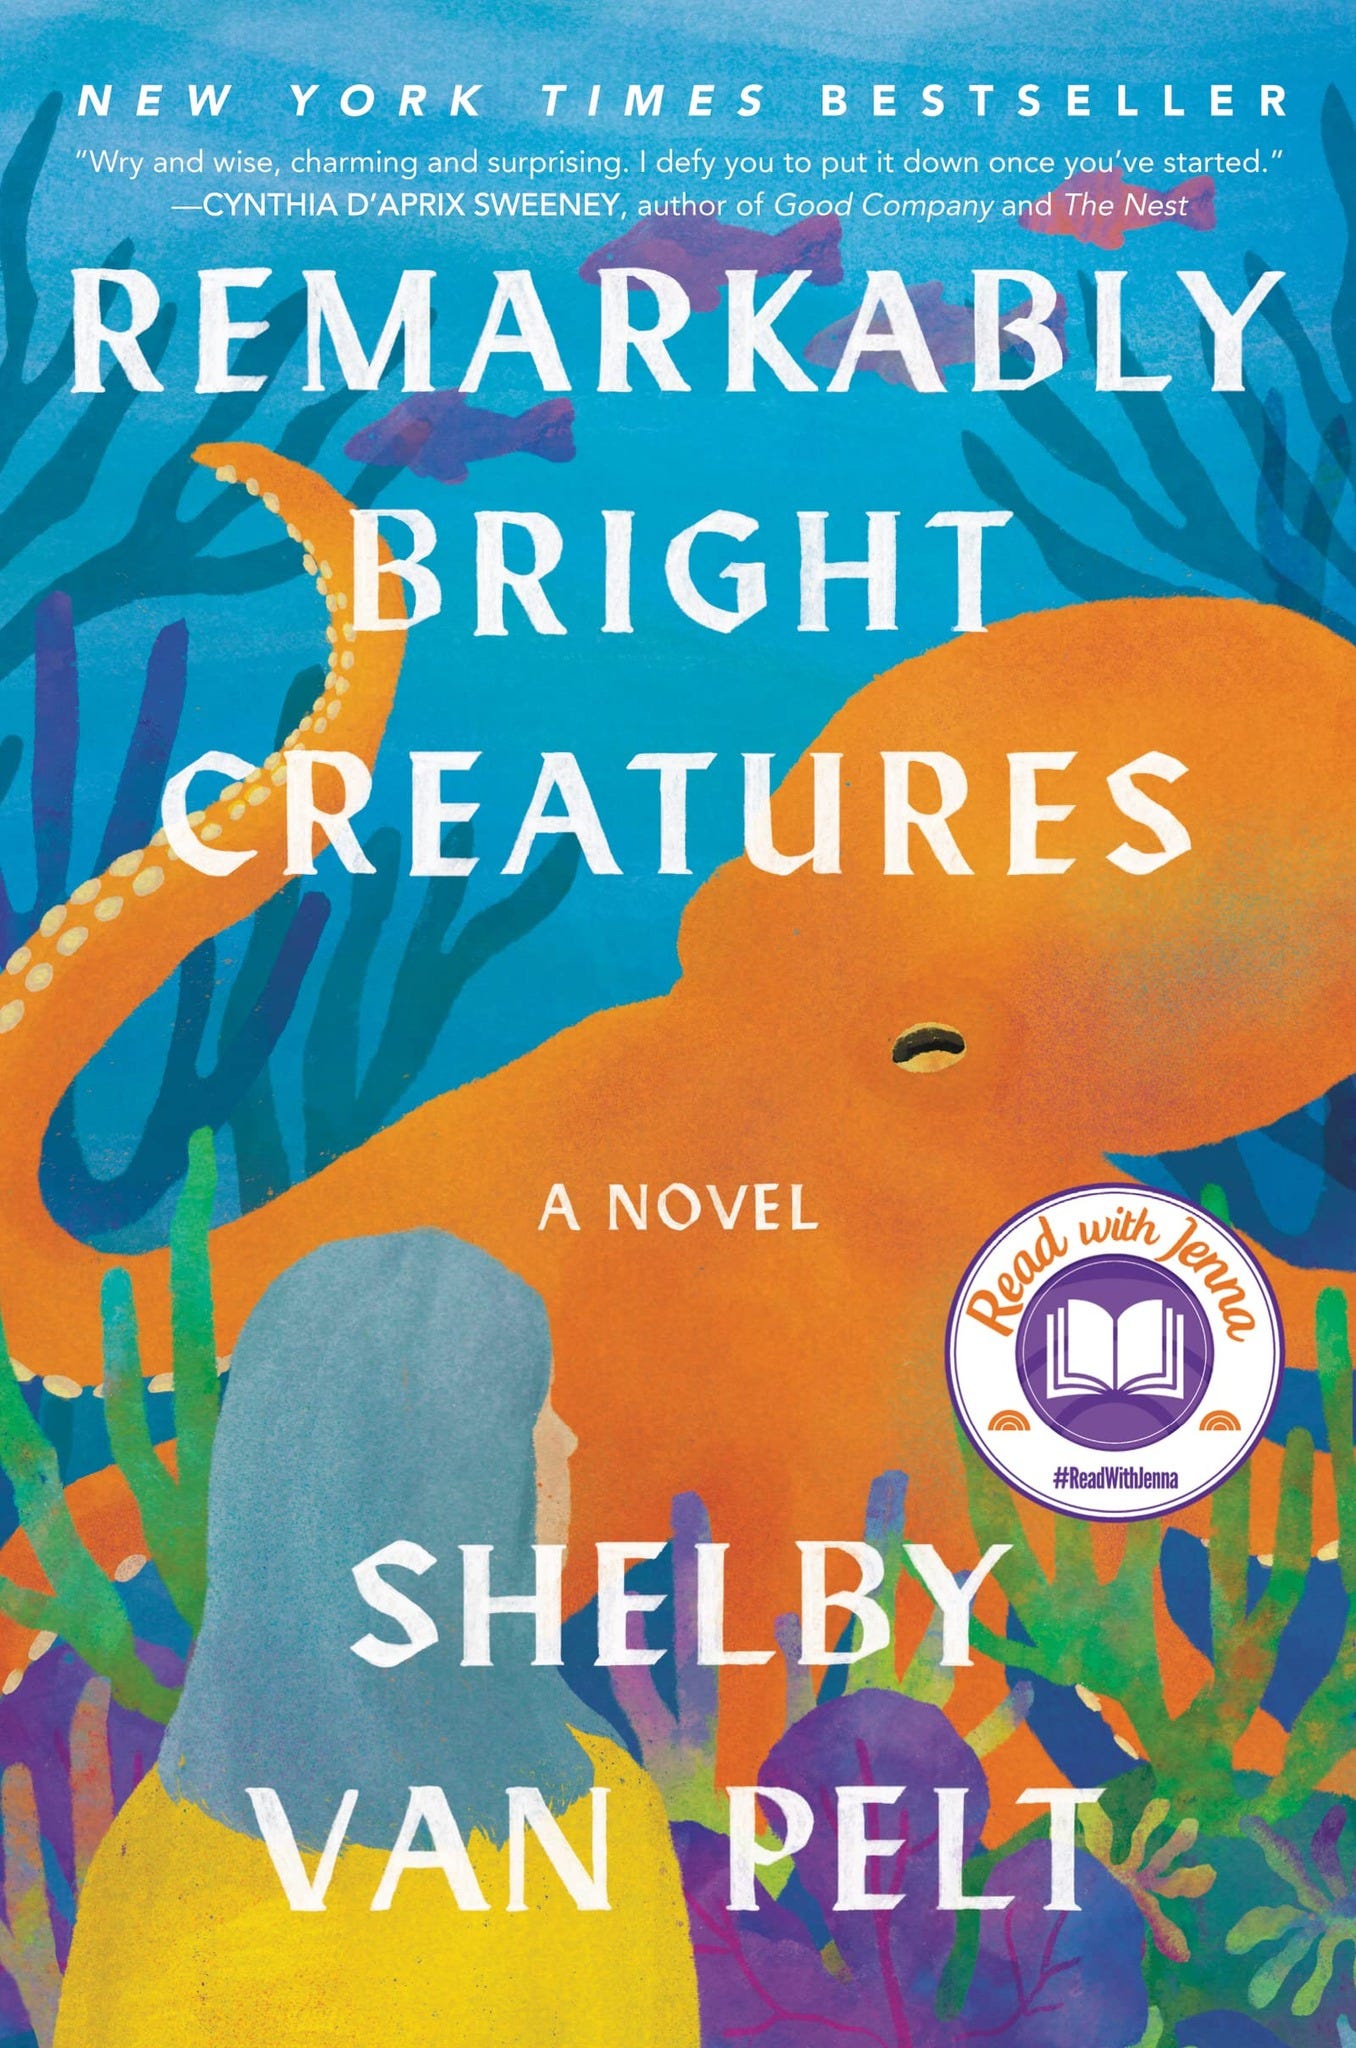 May be an image of text that says 'TIMES NEW YORK BESTSELLER "Wry and wise charming and surprising. defy you puti down once you' started." -CYNTHI 'APRIX SWEENEY author of Good Company and The Nest REMARKABLY BRIGHT CREATURES A NOVEL Read with jera #ReadWithJenna SHELBY VAN PELT'